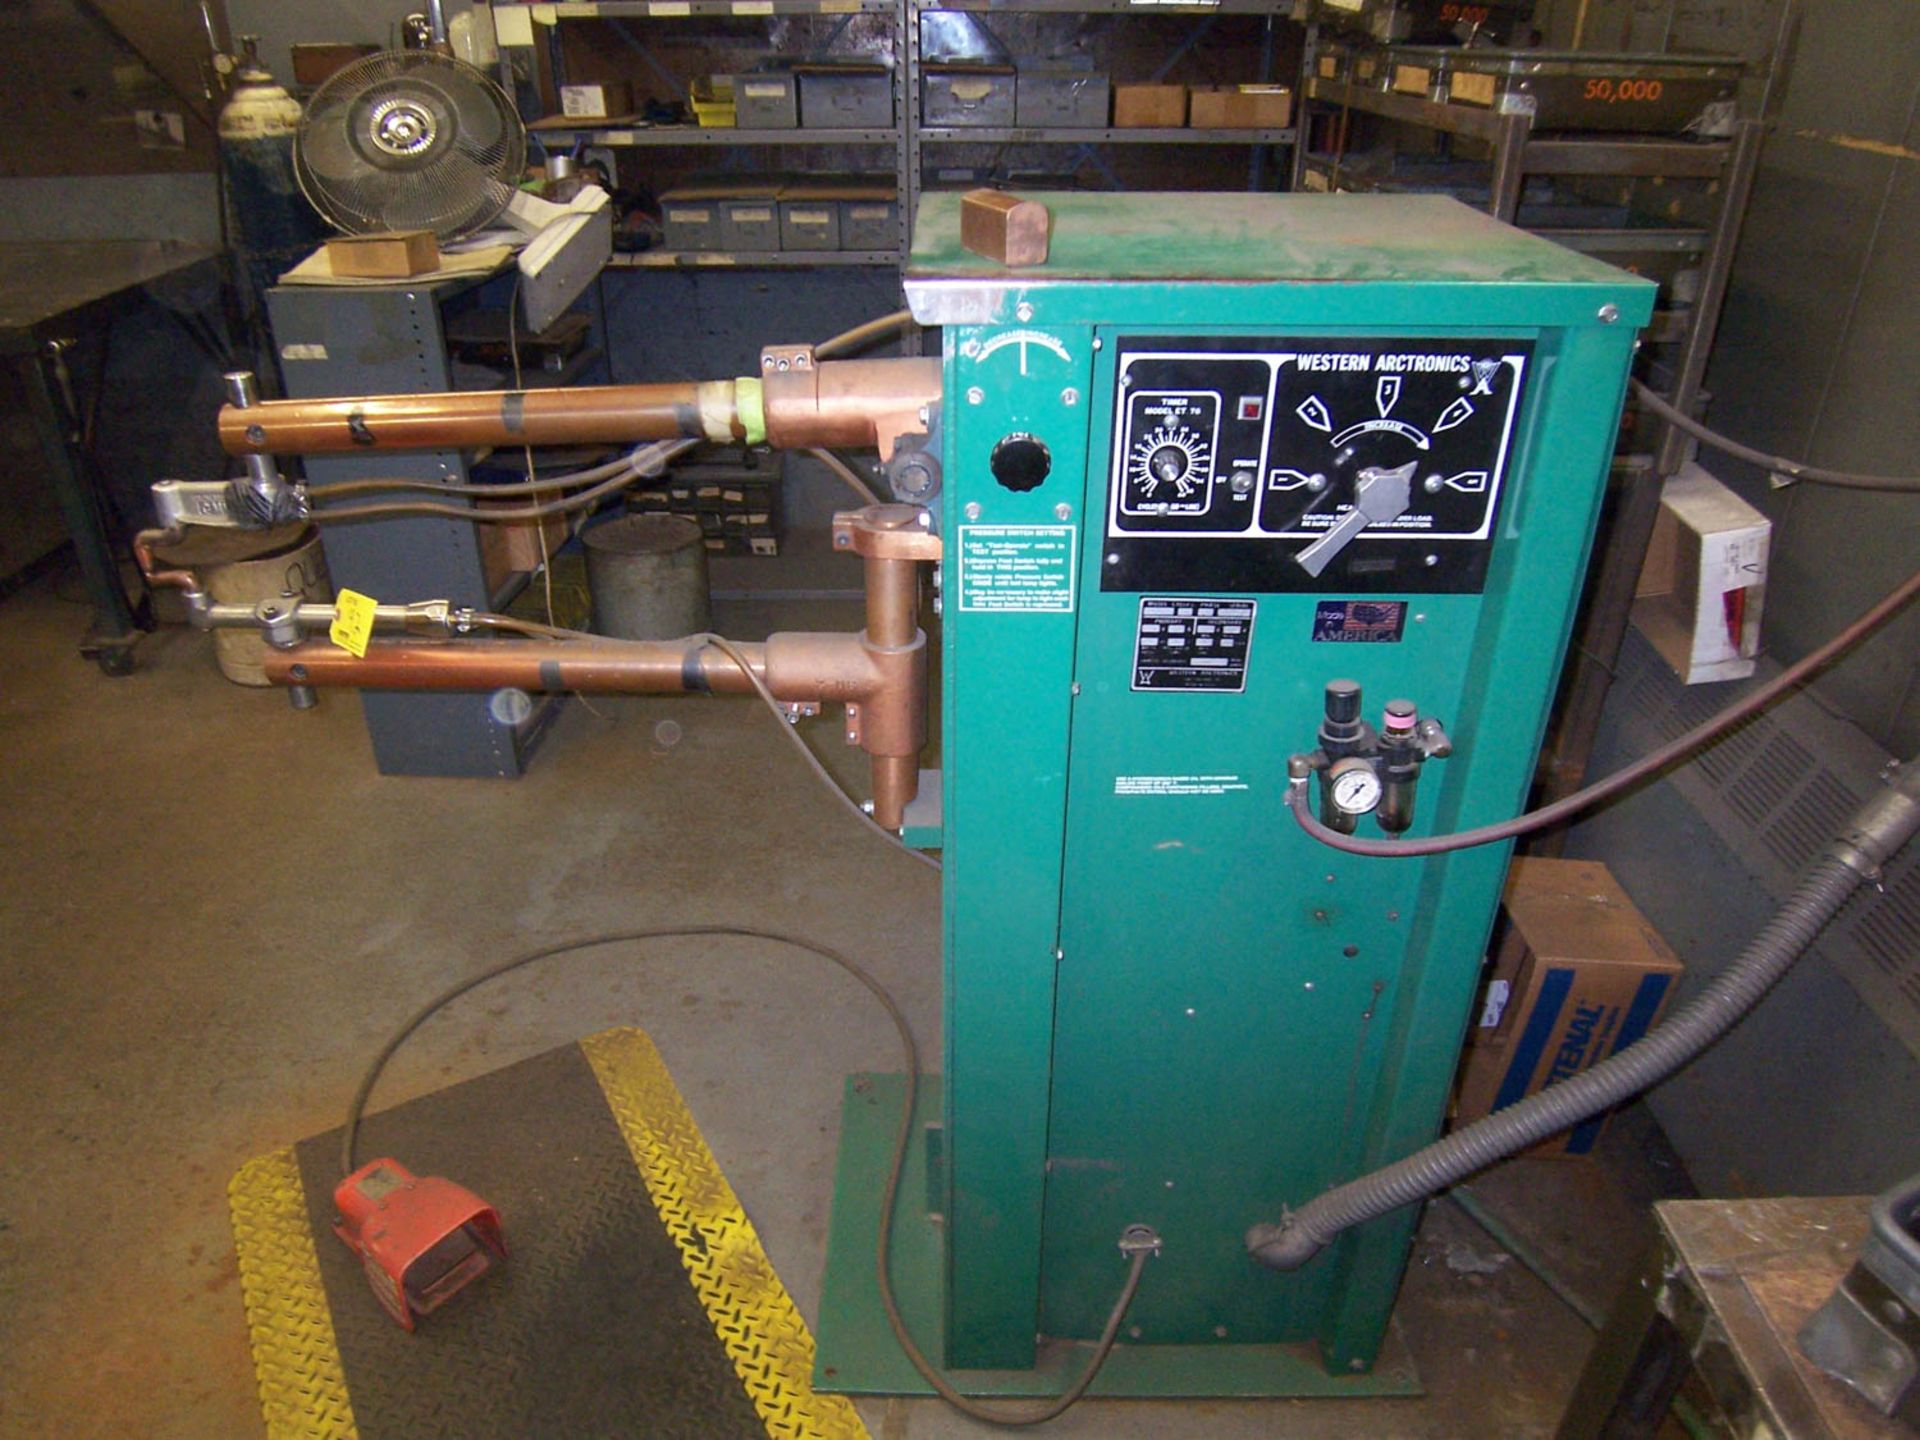 WESTERN ARCTRONICS 30-KVA SPOT WELDER, WITH 27" THROAT, WELD TIMER, FOOT PEDAL, S/N: FH809 - Image 2 of 2